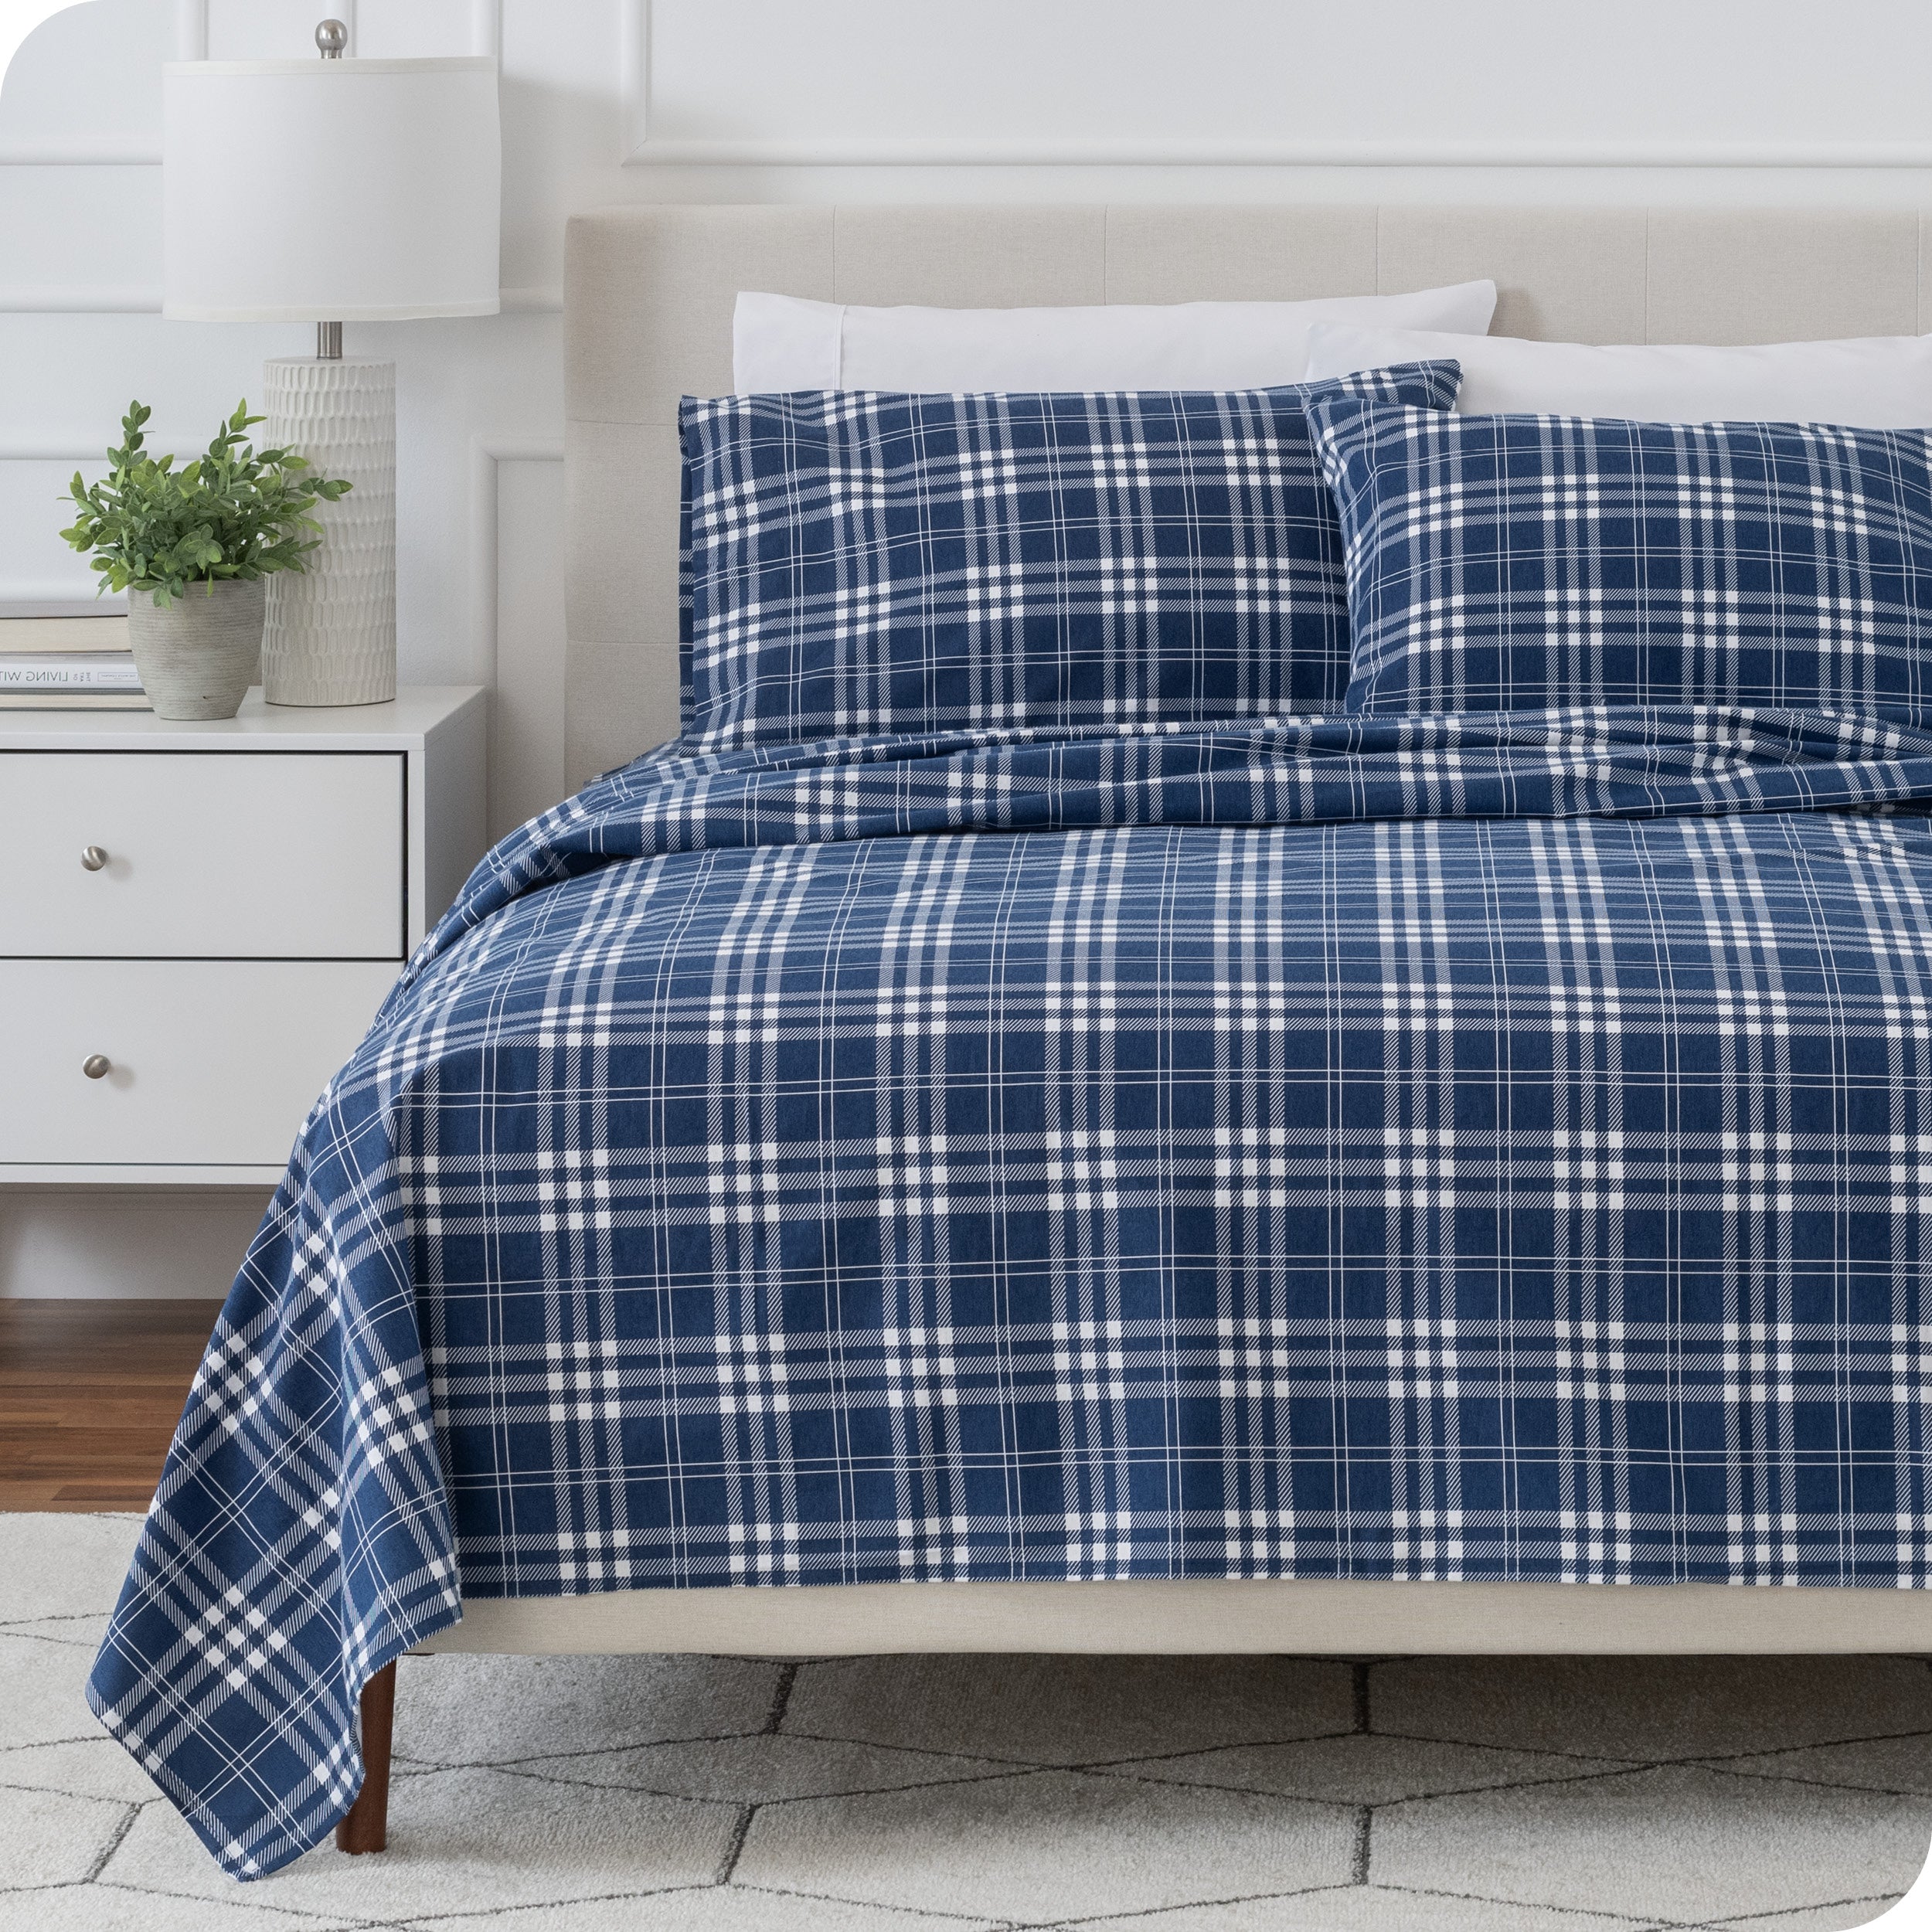 Flannel print sheet set on a bed